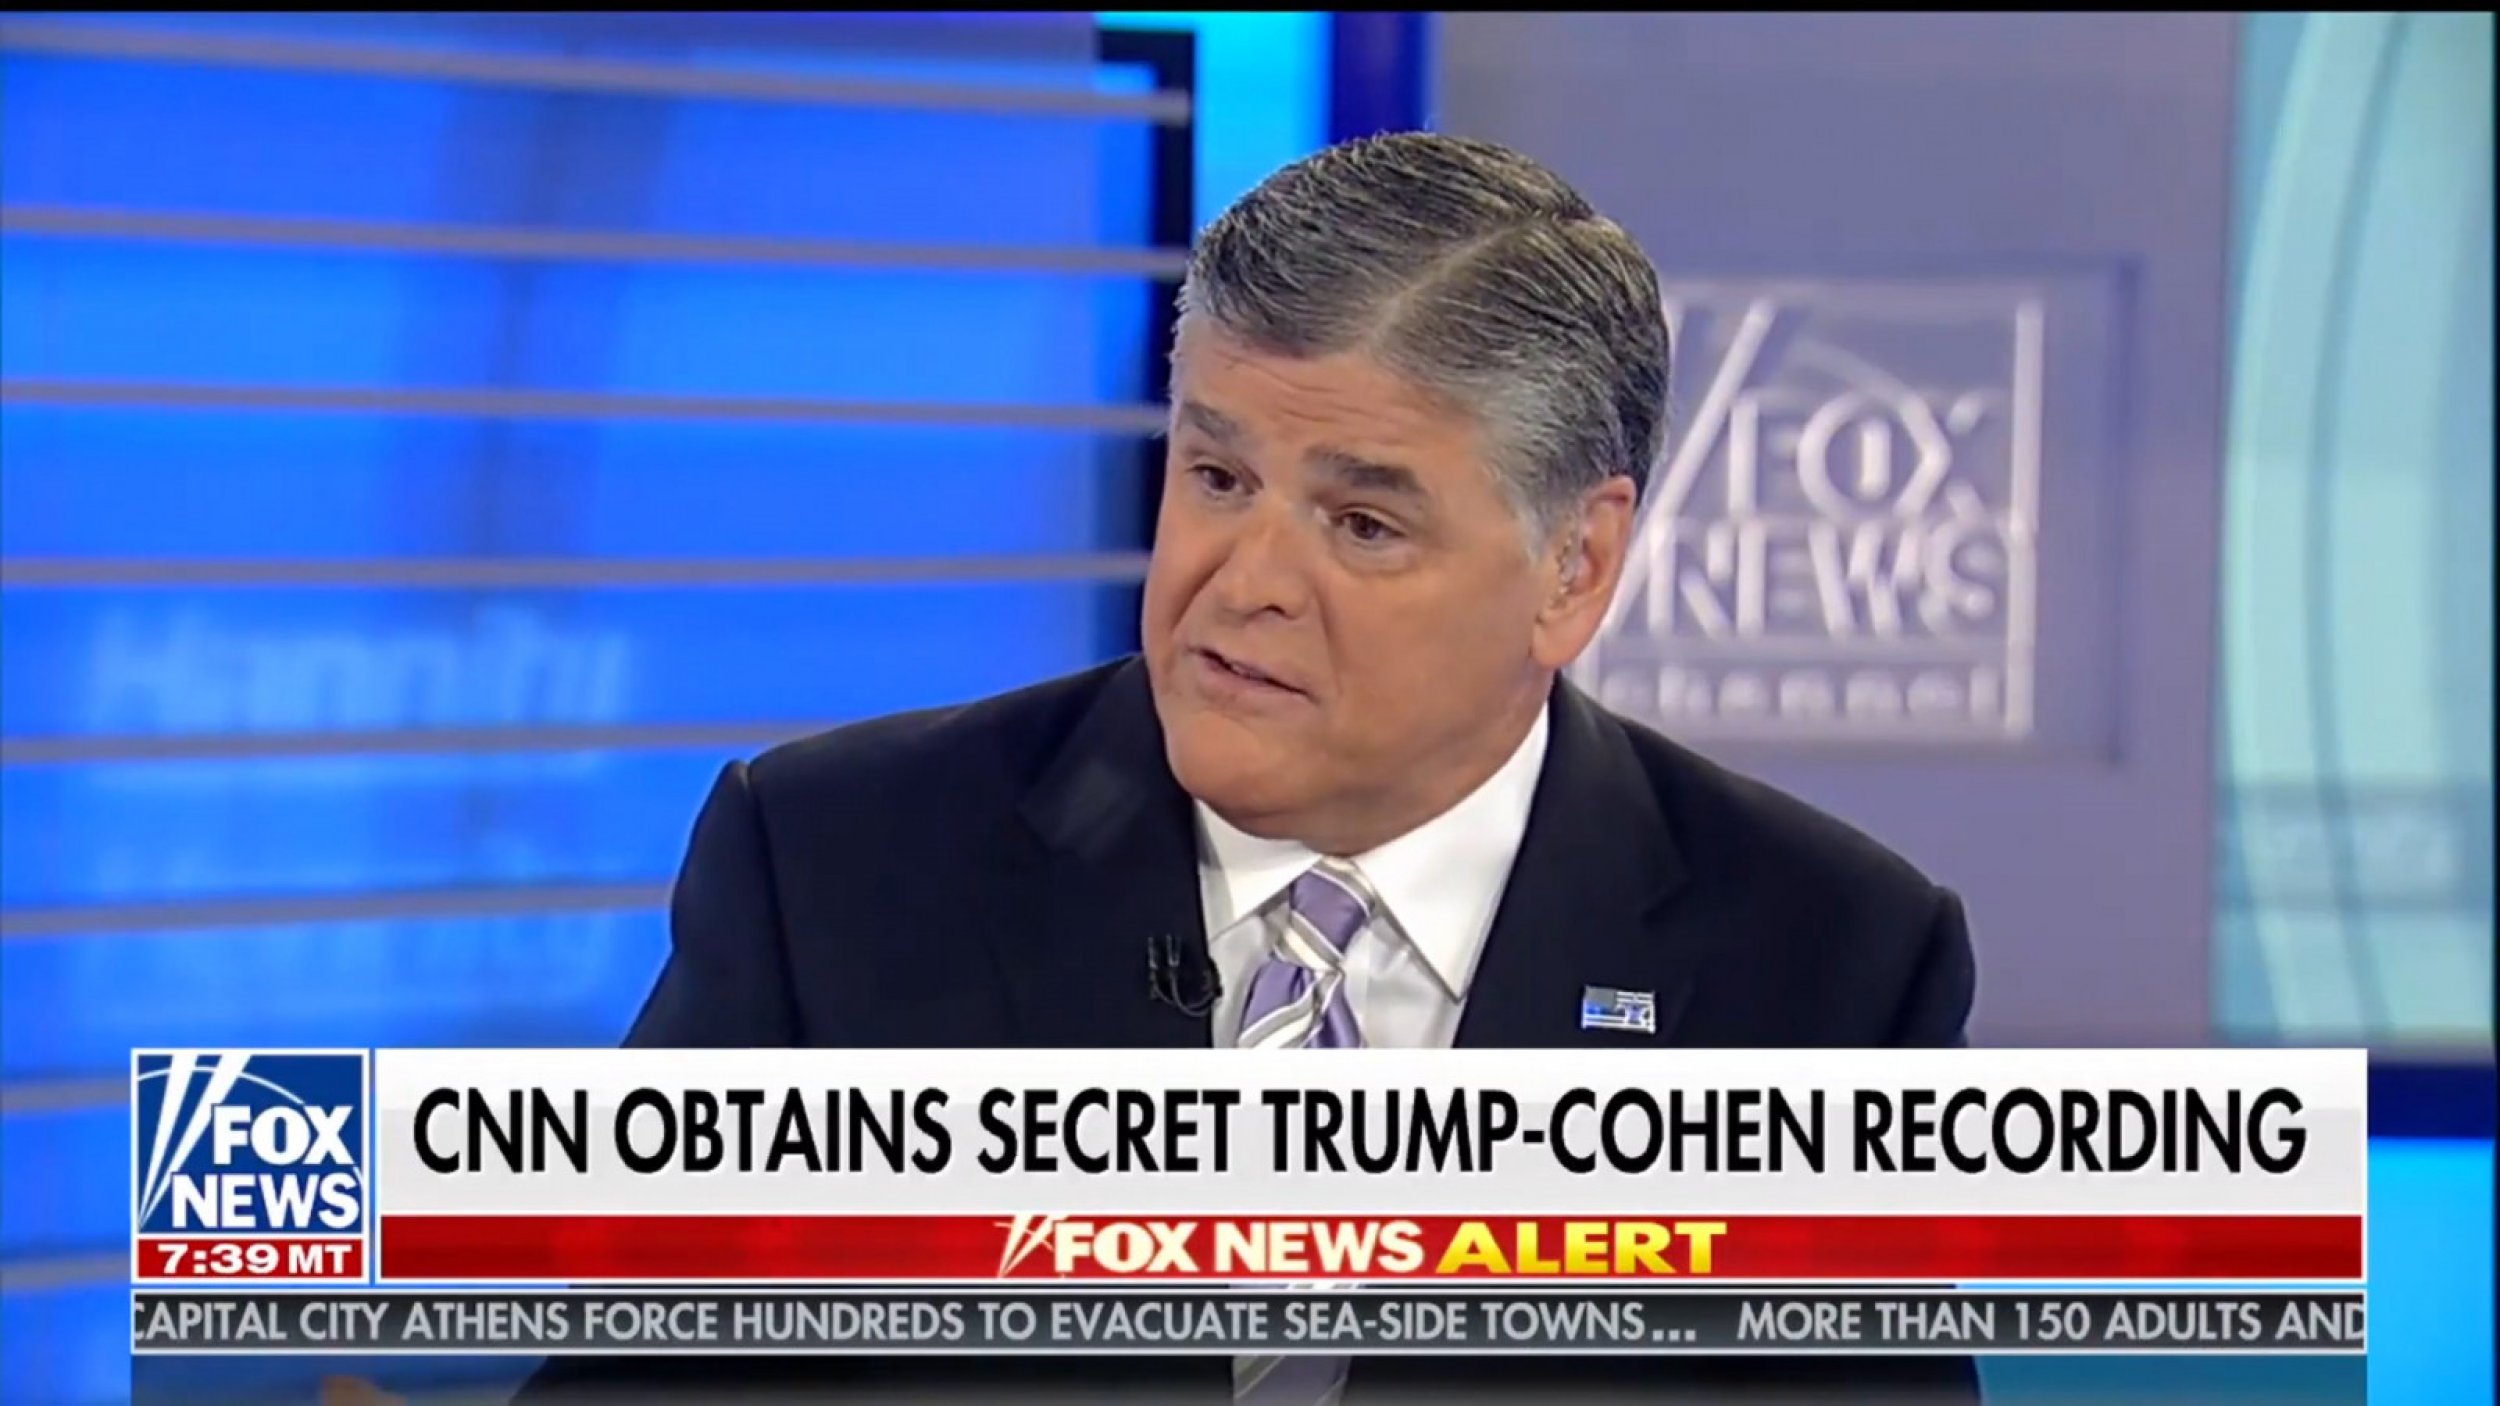 Sean Hannity Says Trump-Cohen Tape Is A Dud Because Audio Is Too Muffled